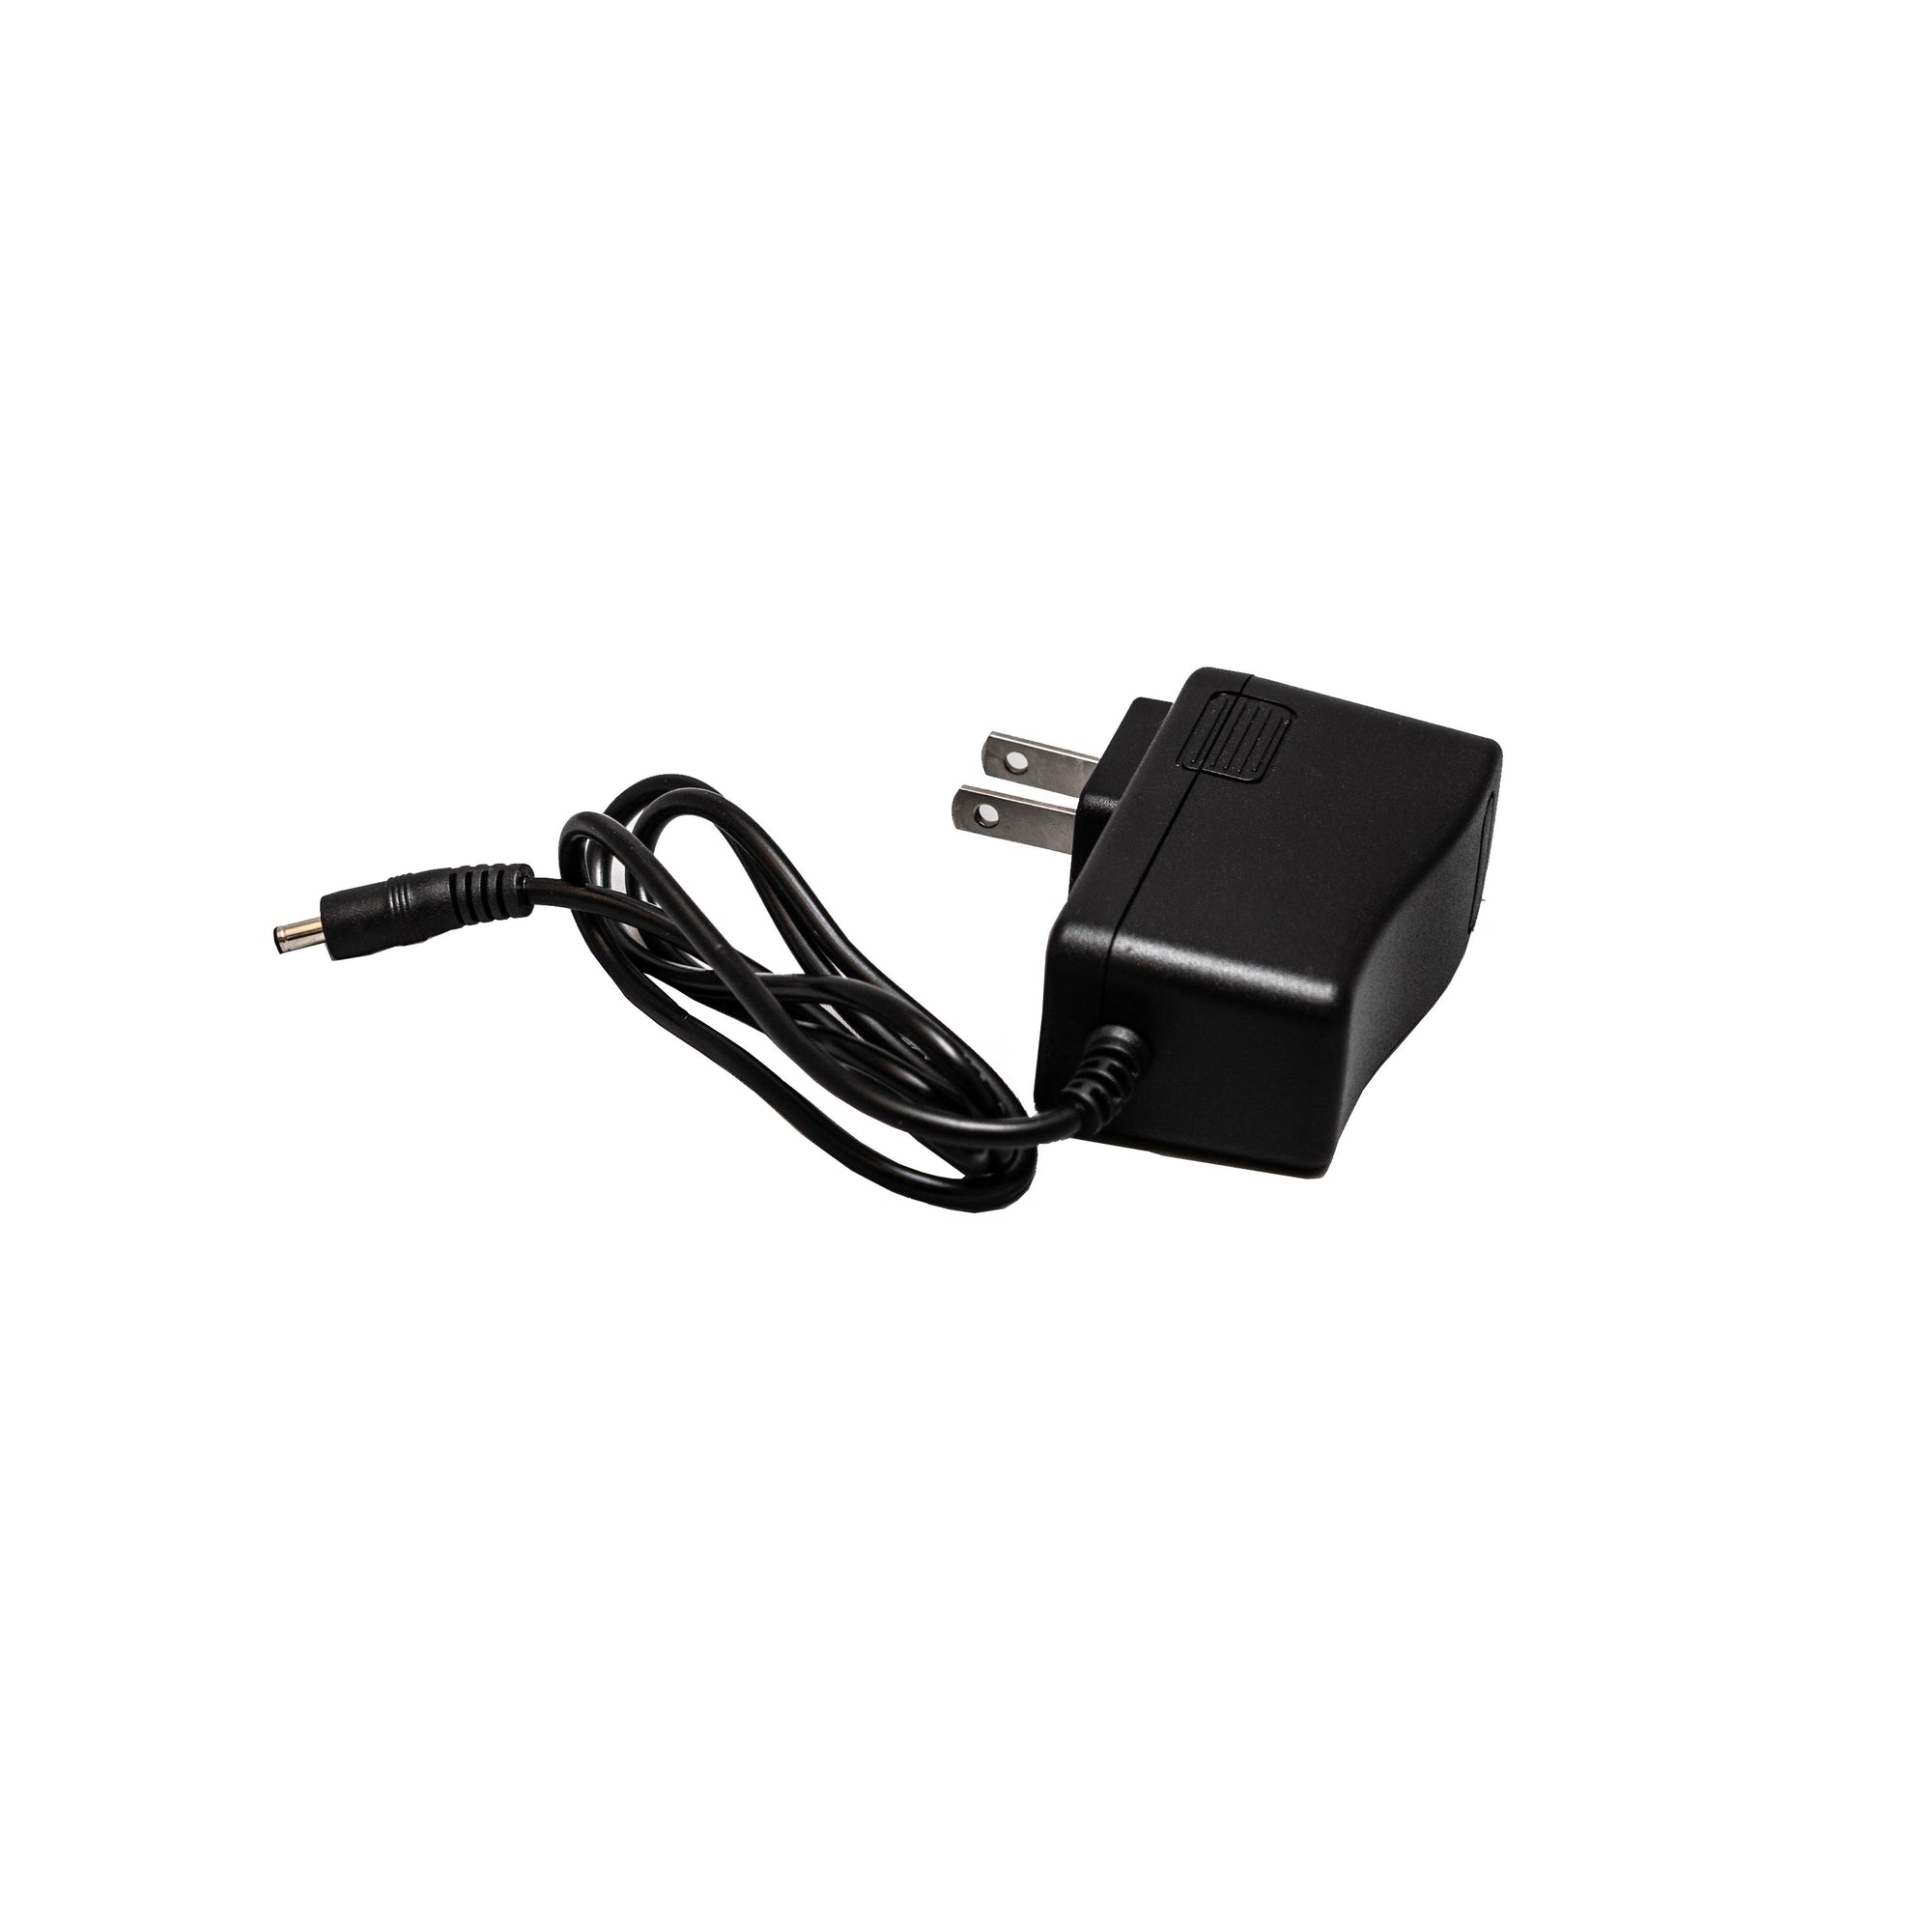 AC Wall Charger for Ignite Batteries - F02002400 - The Parts Lodge